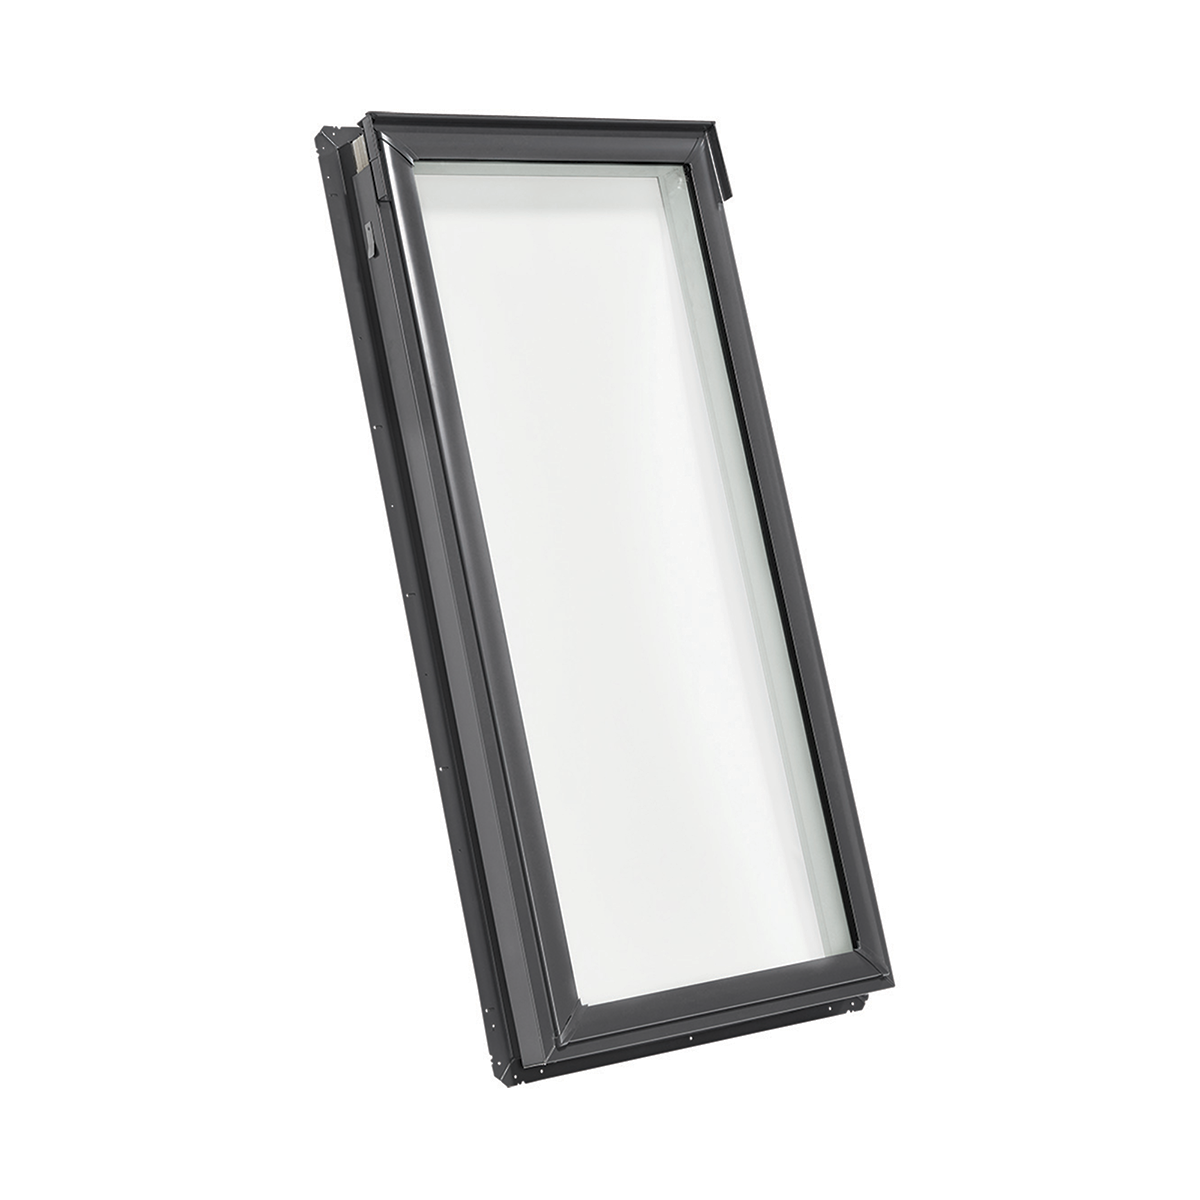 Fixed Deck-Mount Skylight with Laminated Low-E3 Glass - 22-1/2 in. x 22-15/16 in. - FS D26